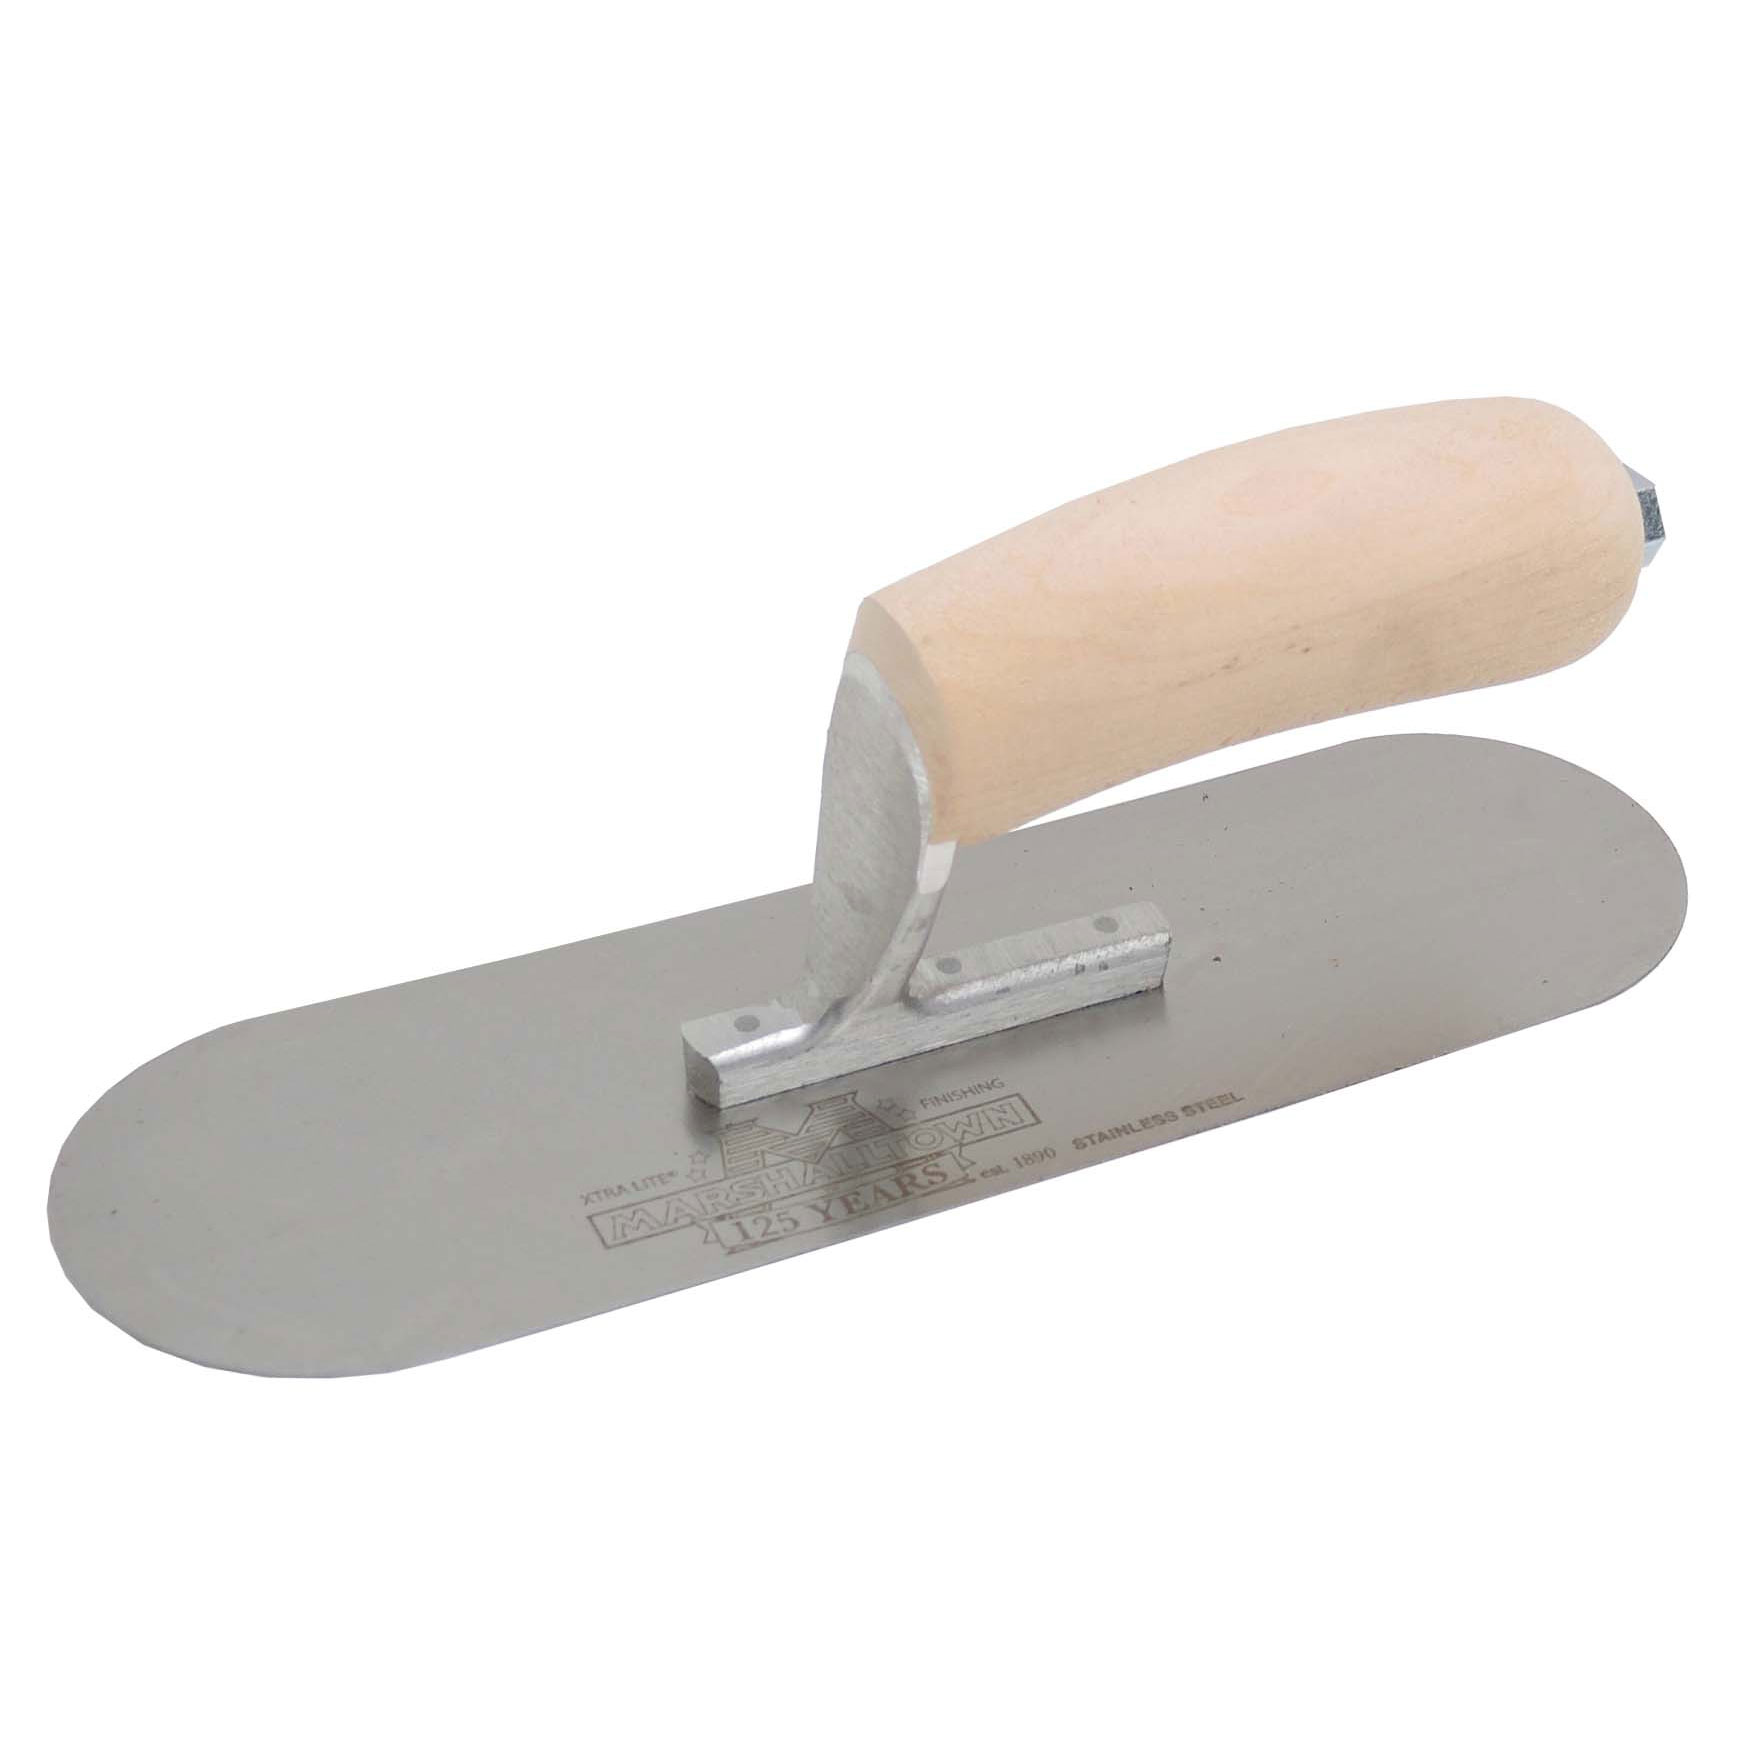 Marshalltown SP10SS 10in x 3in Stainless Steel Pool Trowel with Wood Handle SP10SS